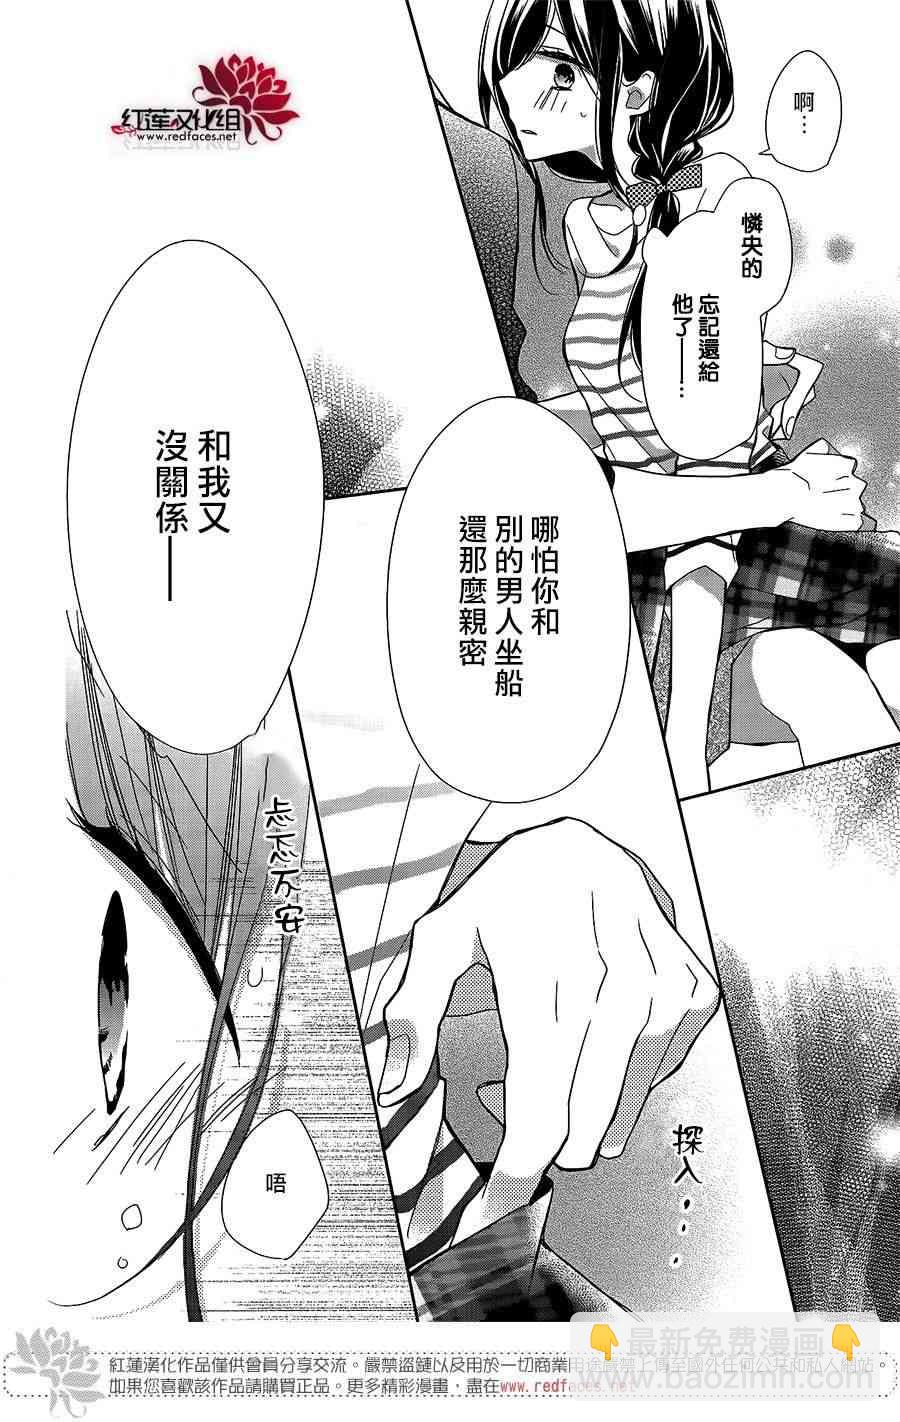 If given a second chance - 6話 - 3